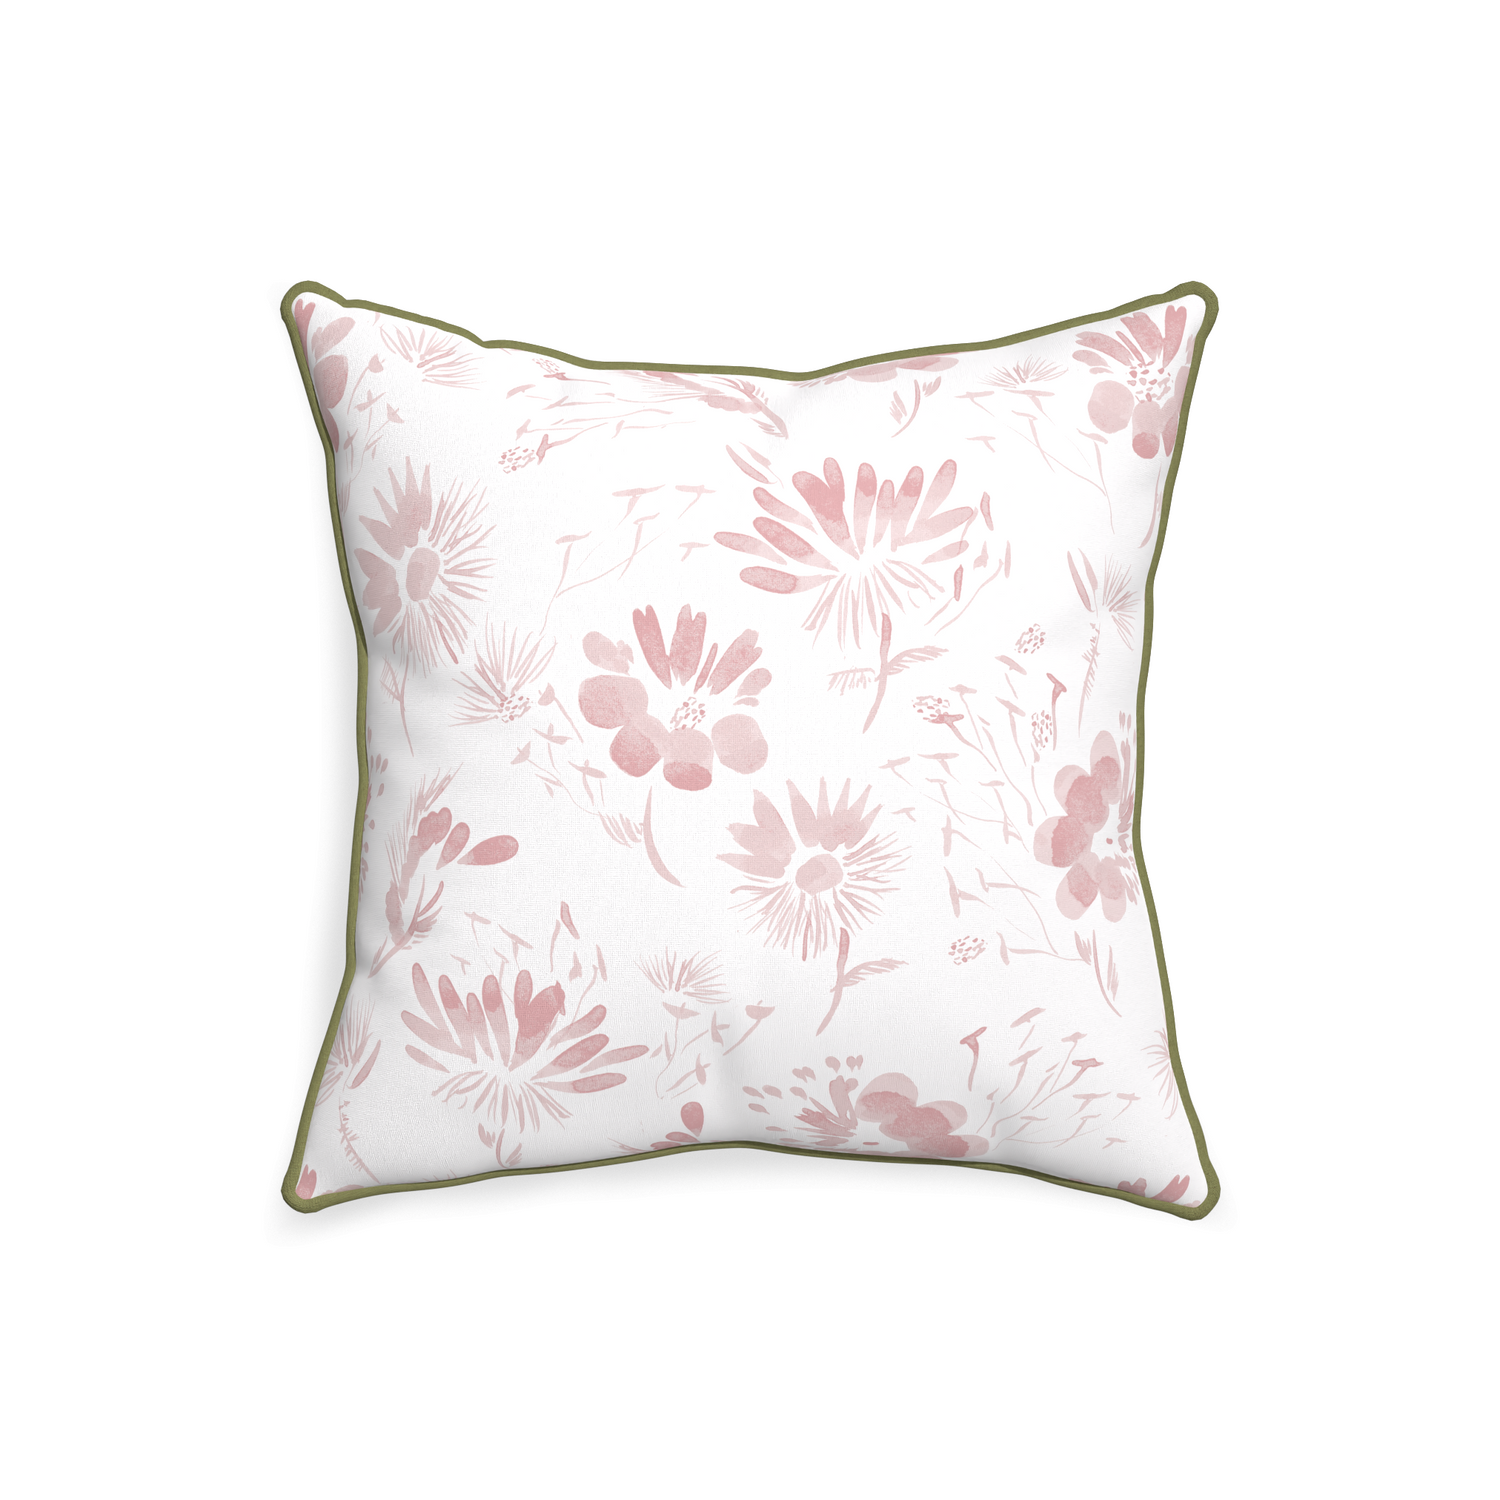 20-square blake custom pillow with moss piping on white background